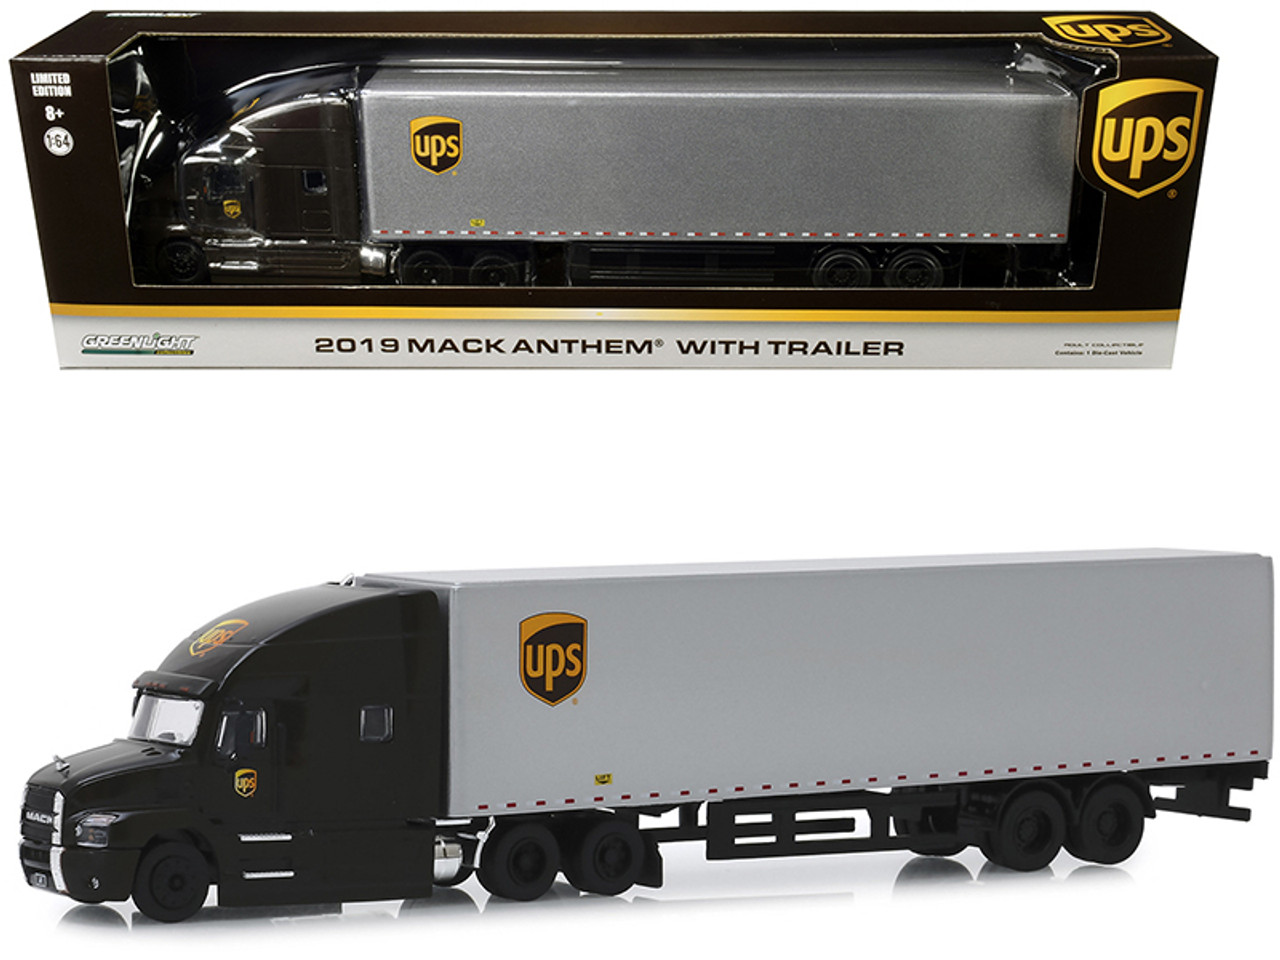 2019 Mack Anthem with Trailer "United Parcel Service" (UPS) 1/64 Diecast Model by Greenlight